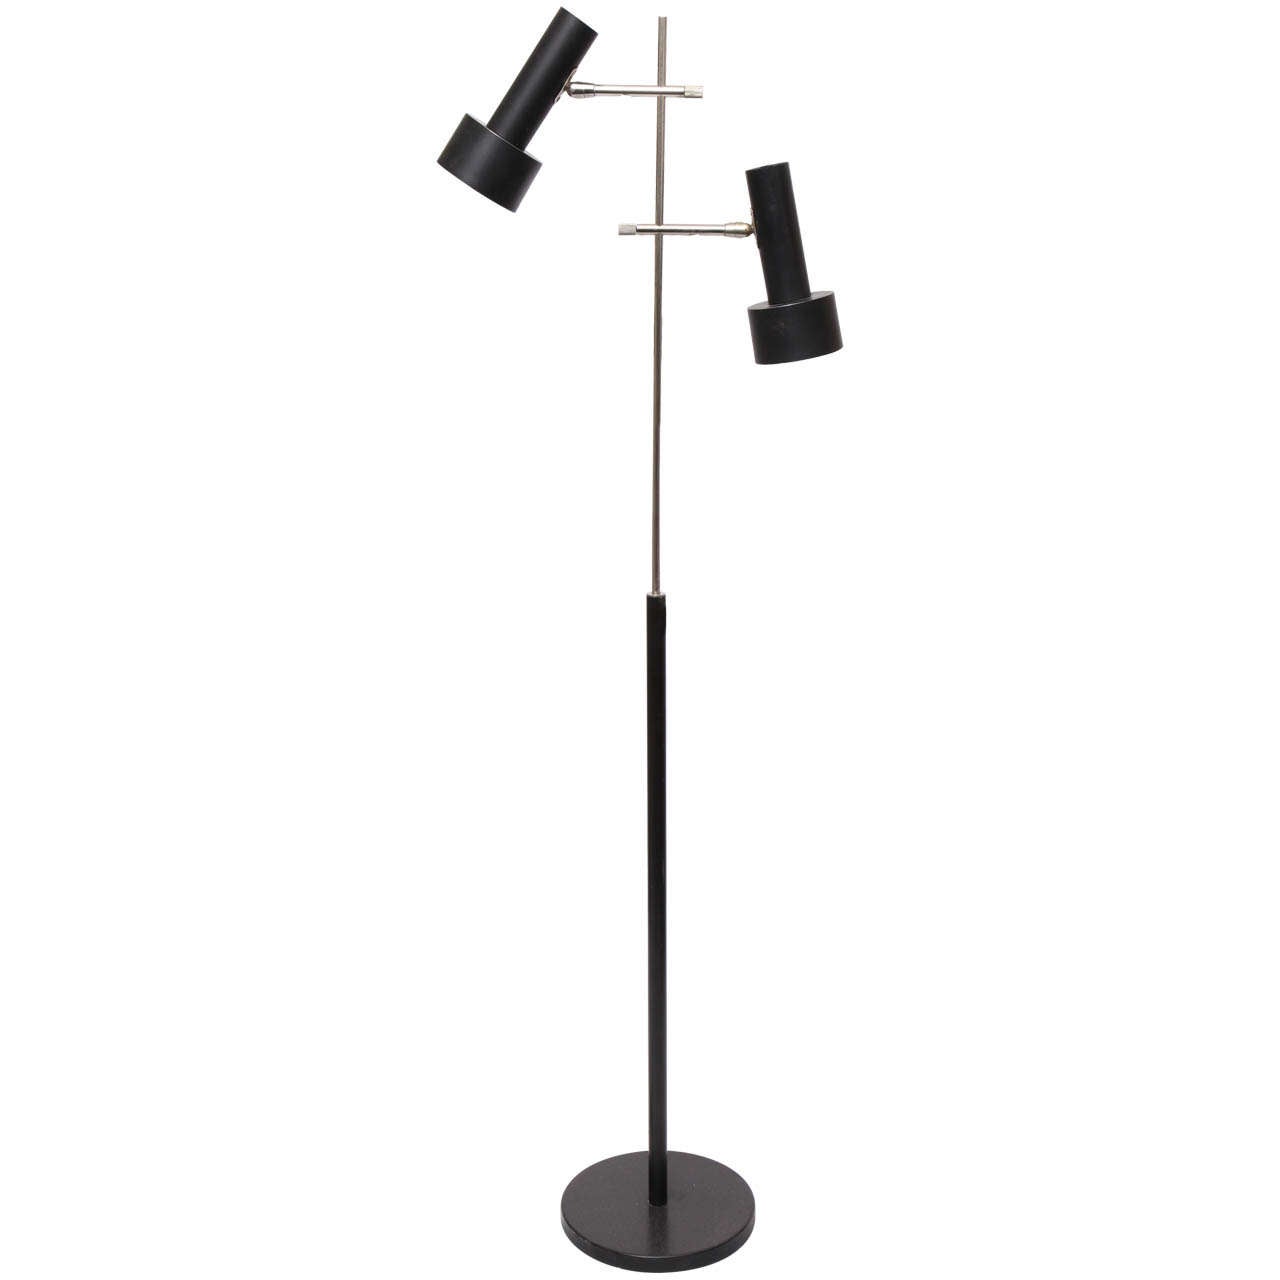 1950s Italian Articulated Floor Lamp Attributed to O-Luce